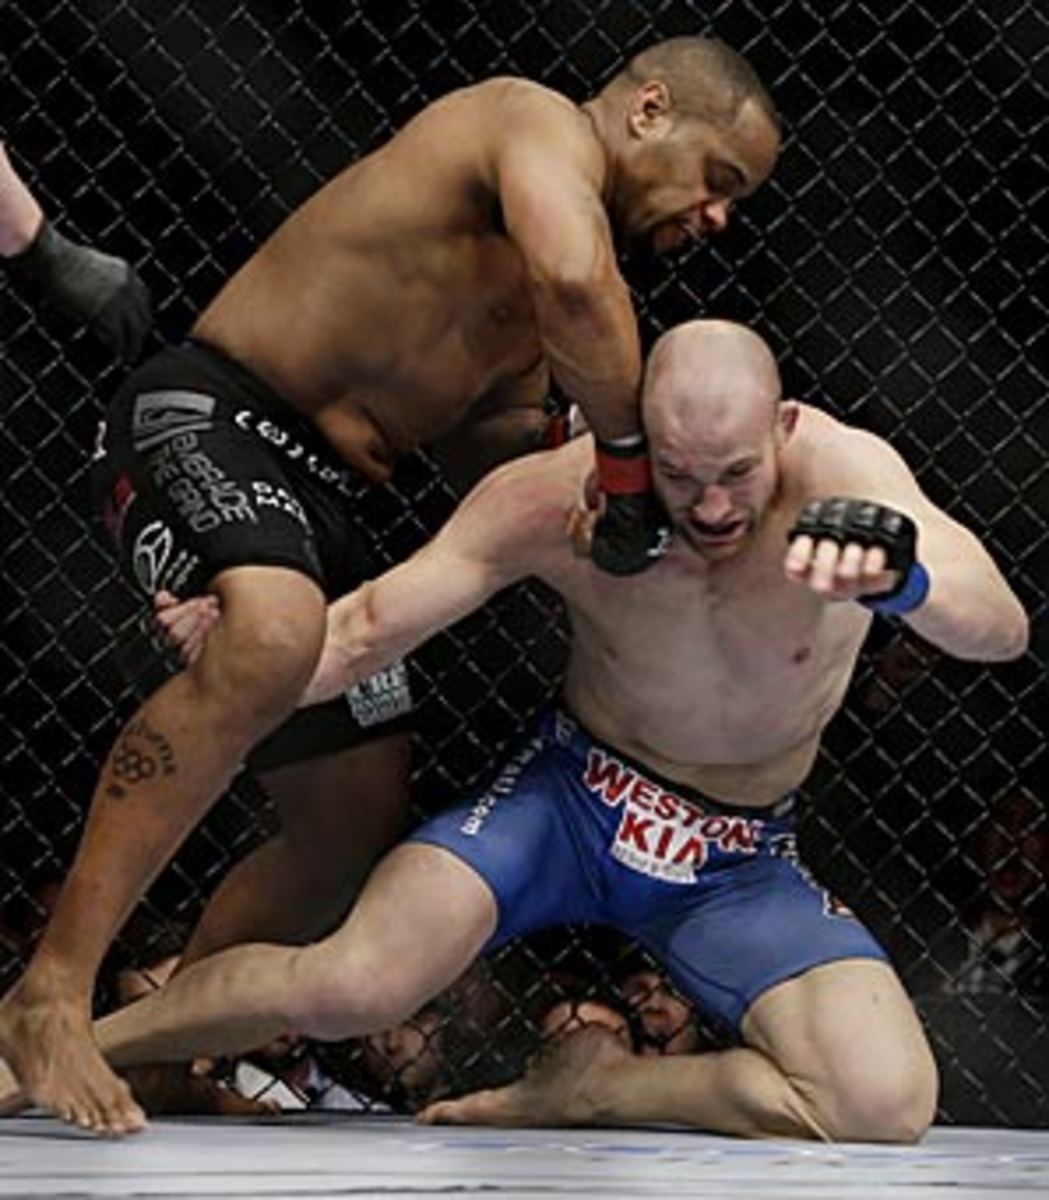 Daniel Cormier had an easy first-round victory over Cummins. (AP)